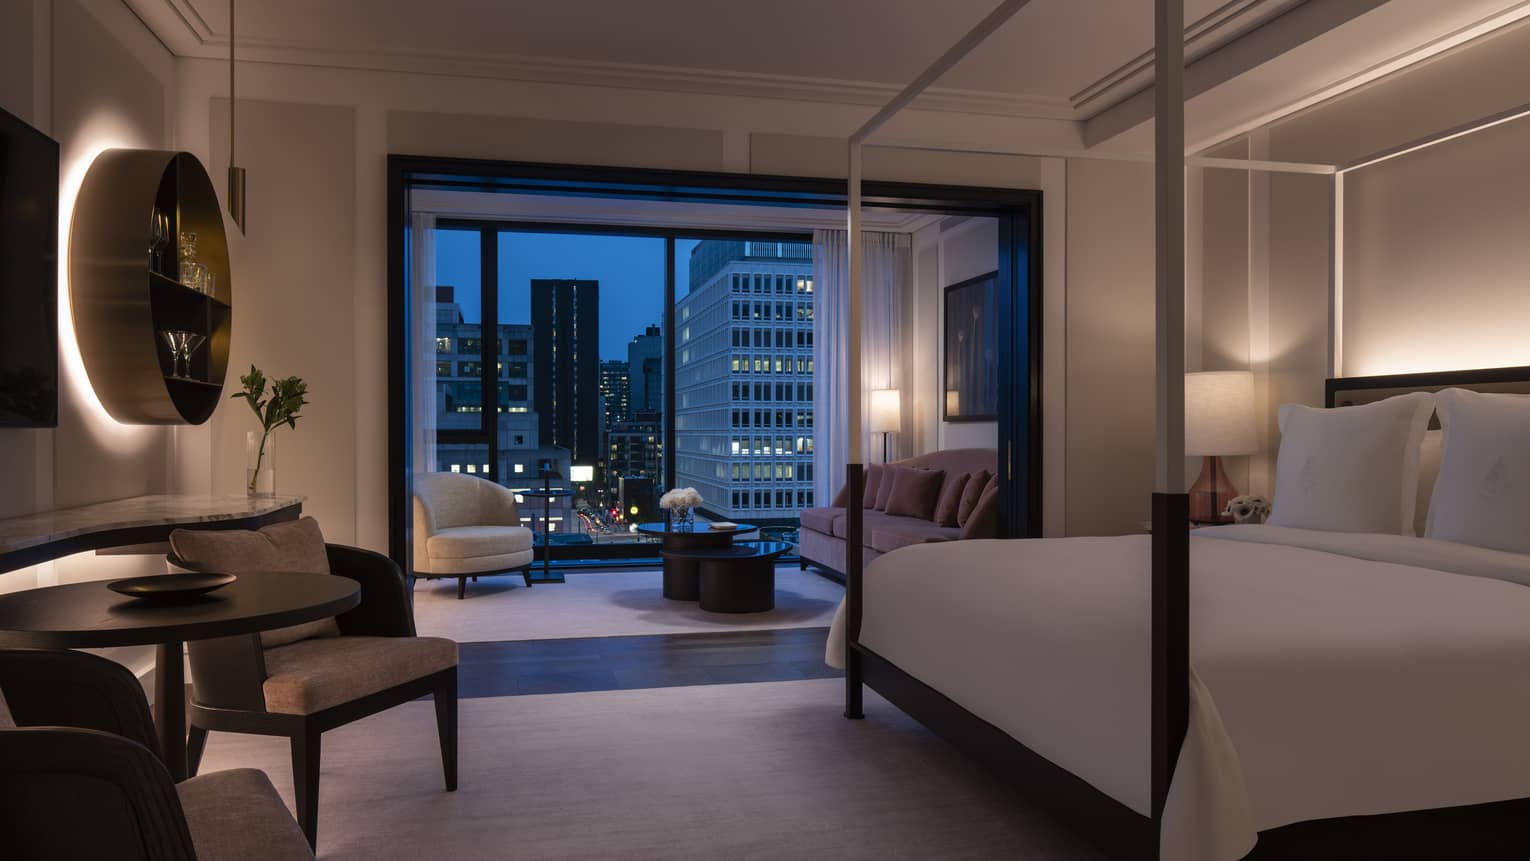 Four Seasons Executive Suite, dimly lit with four-poster modern bed and evening patio views